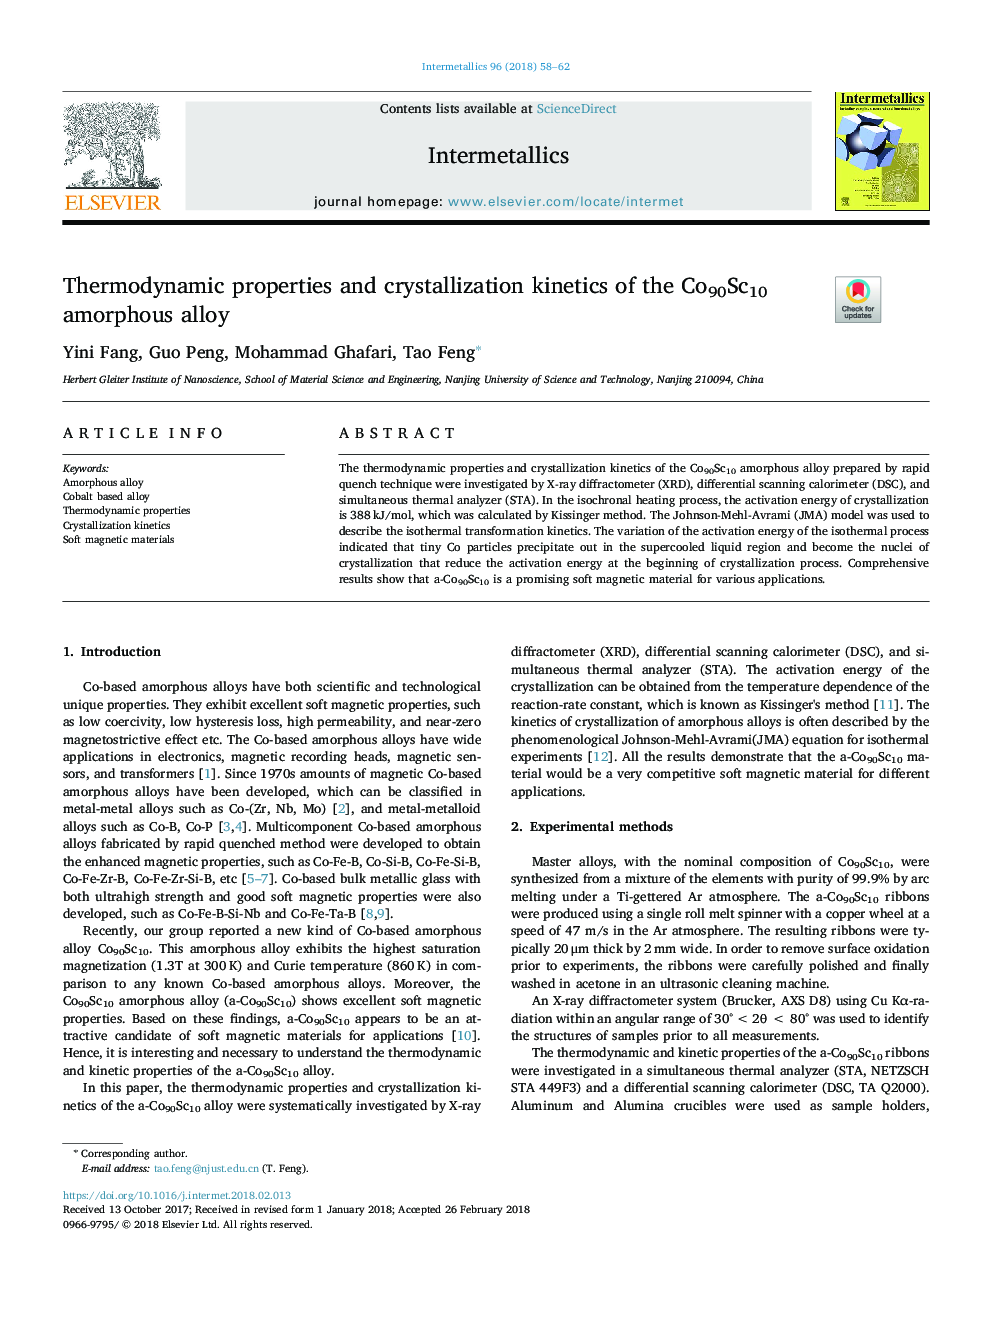 Thermodynamic properties and crystallization kinetics of the Co90Sc10 amorphous alloy